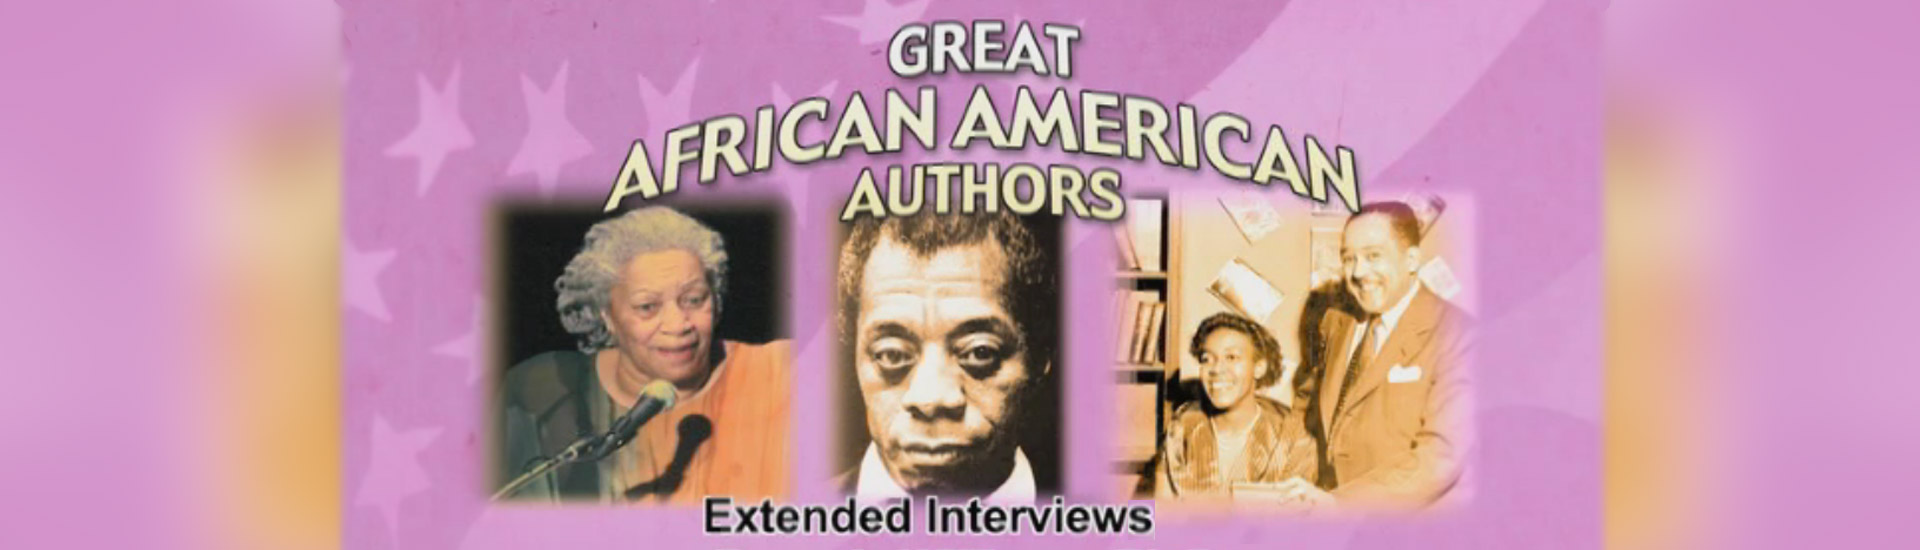 Great African American Authors: Extended Interviews